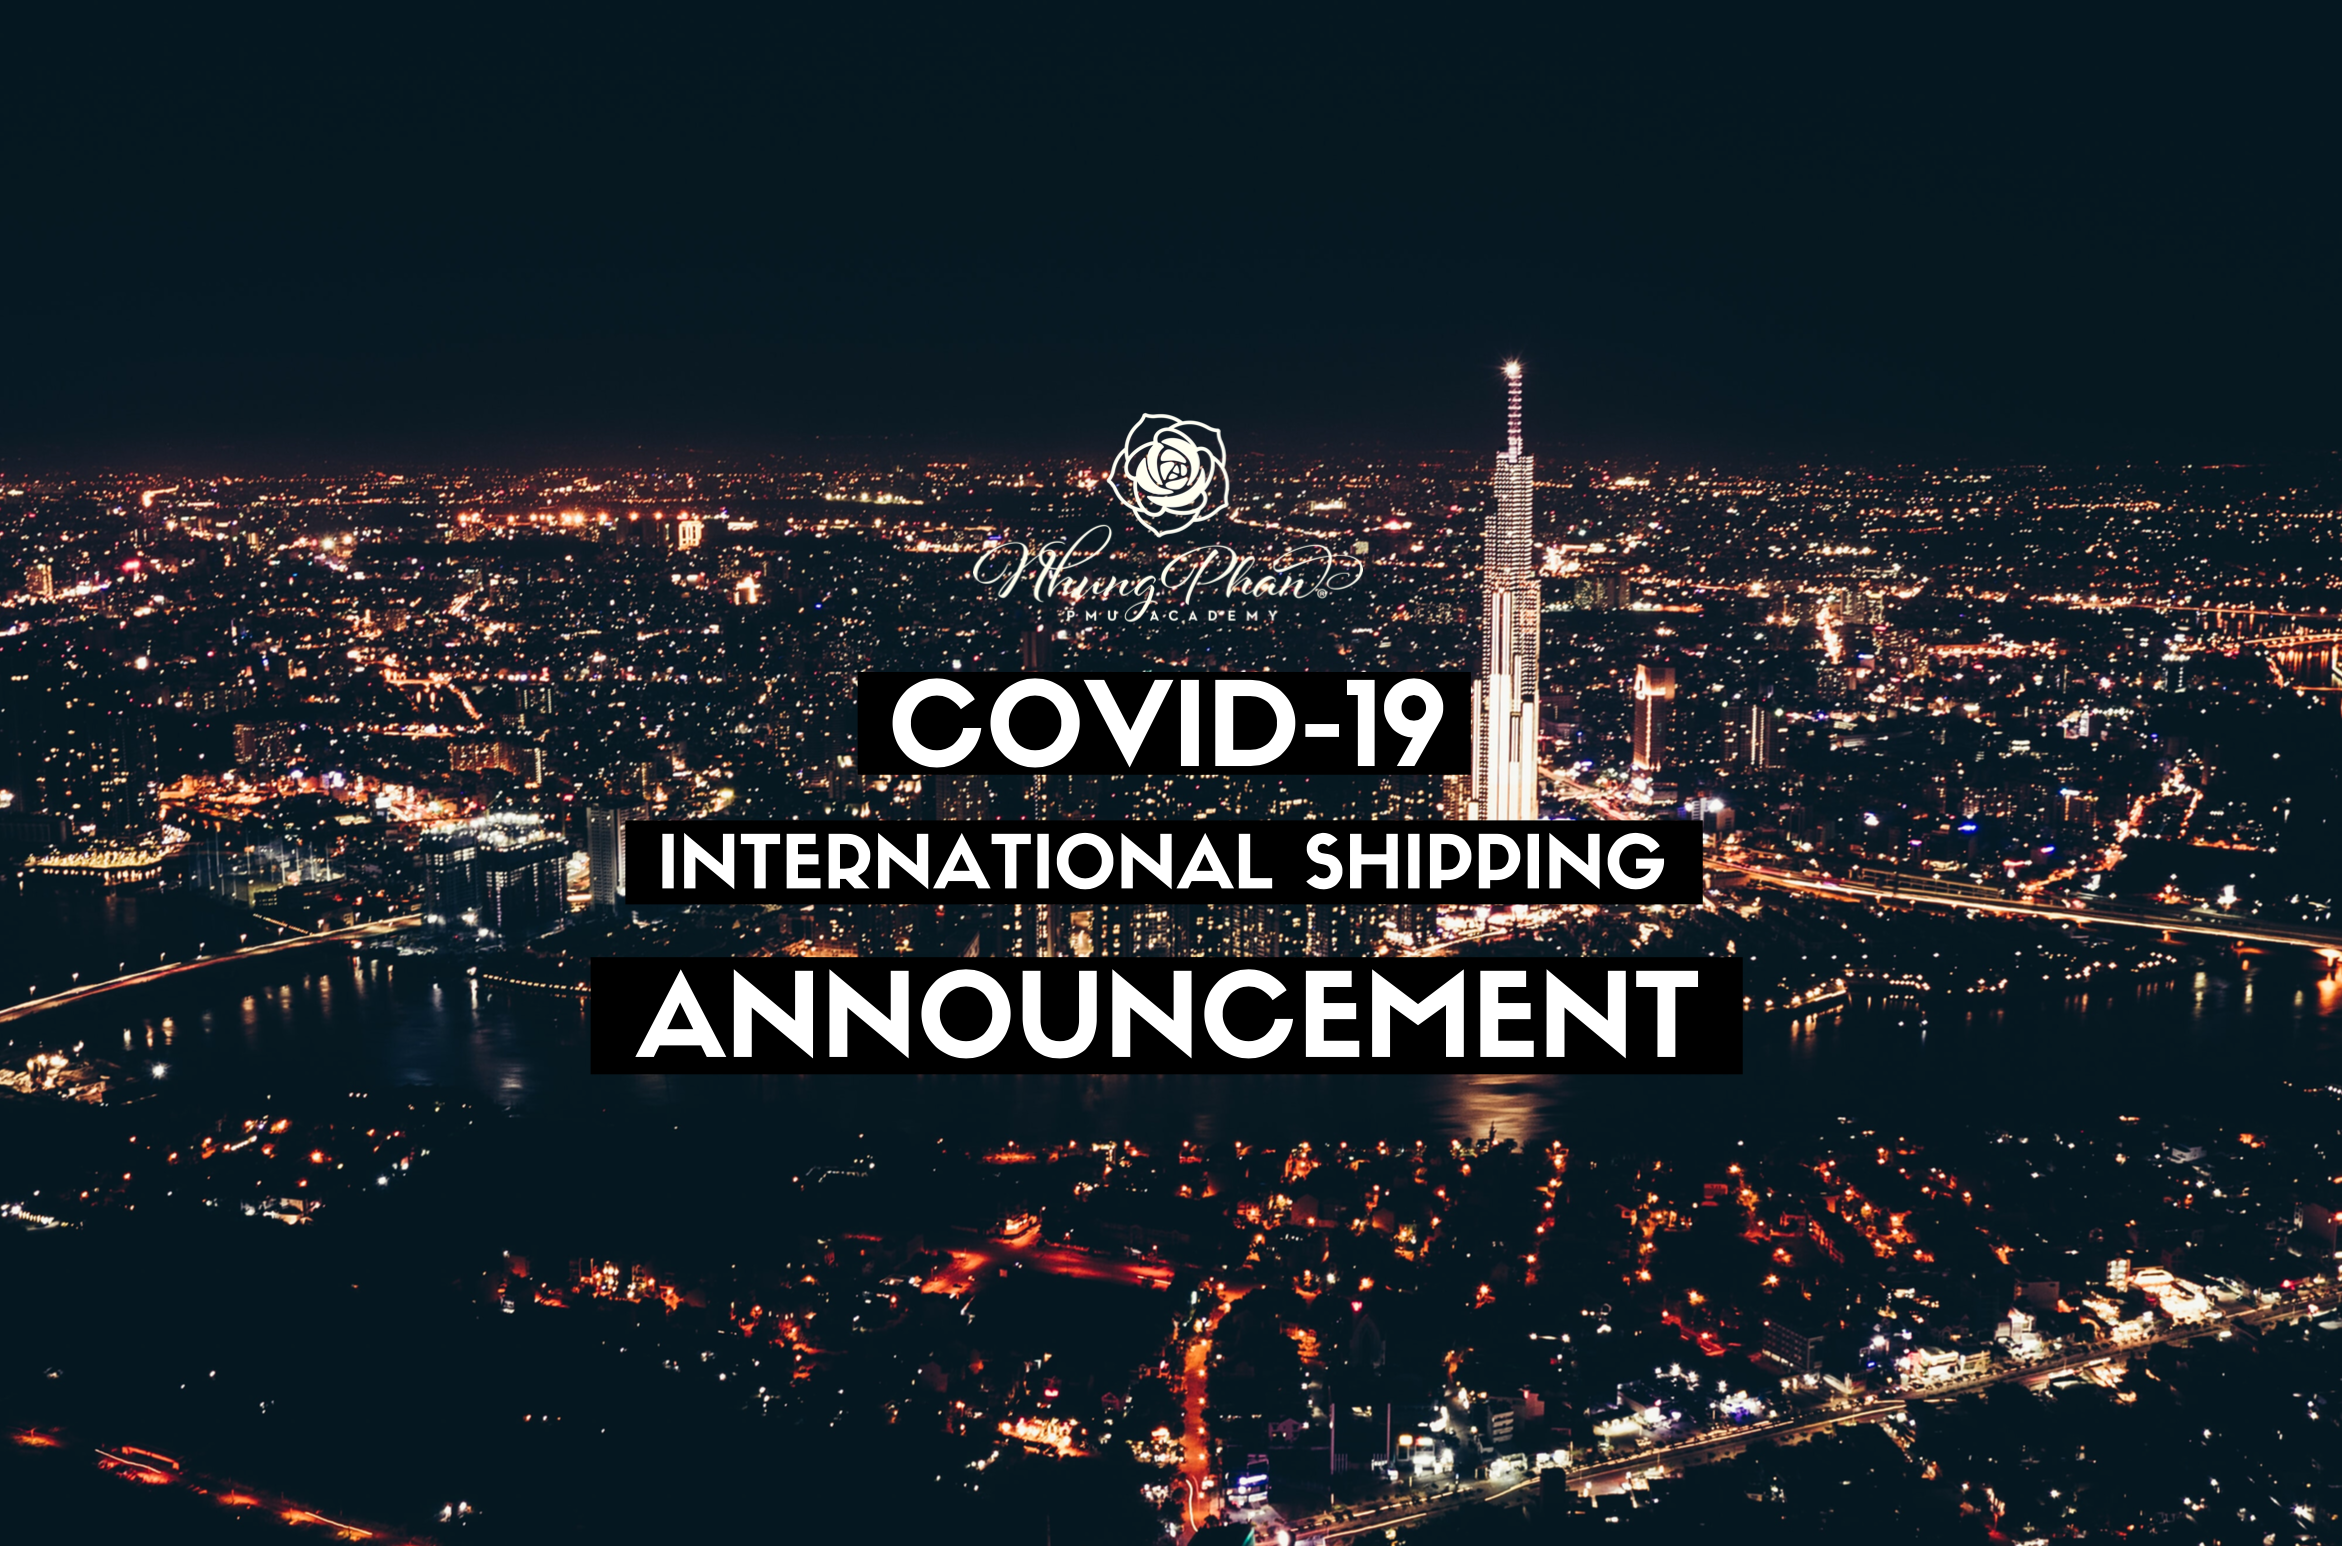 COVID-19 INTERNATIONAL SHIPPING ANNOUNCEMENT